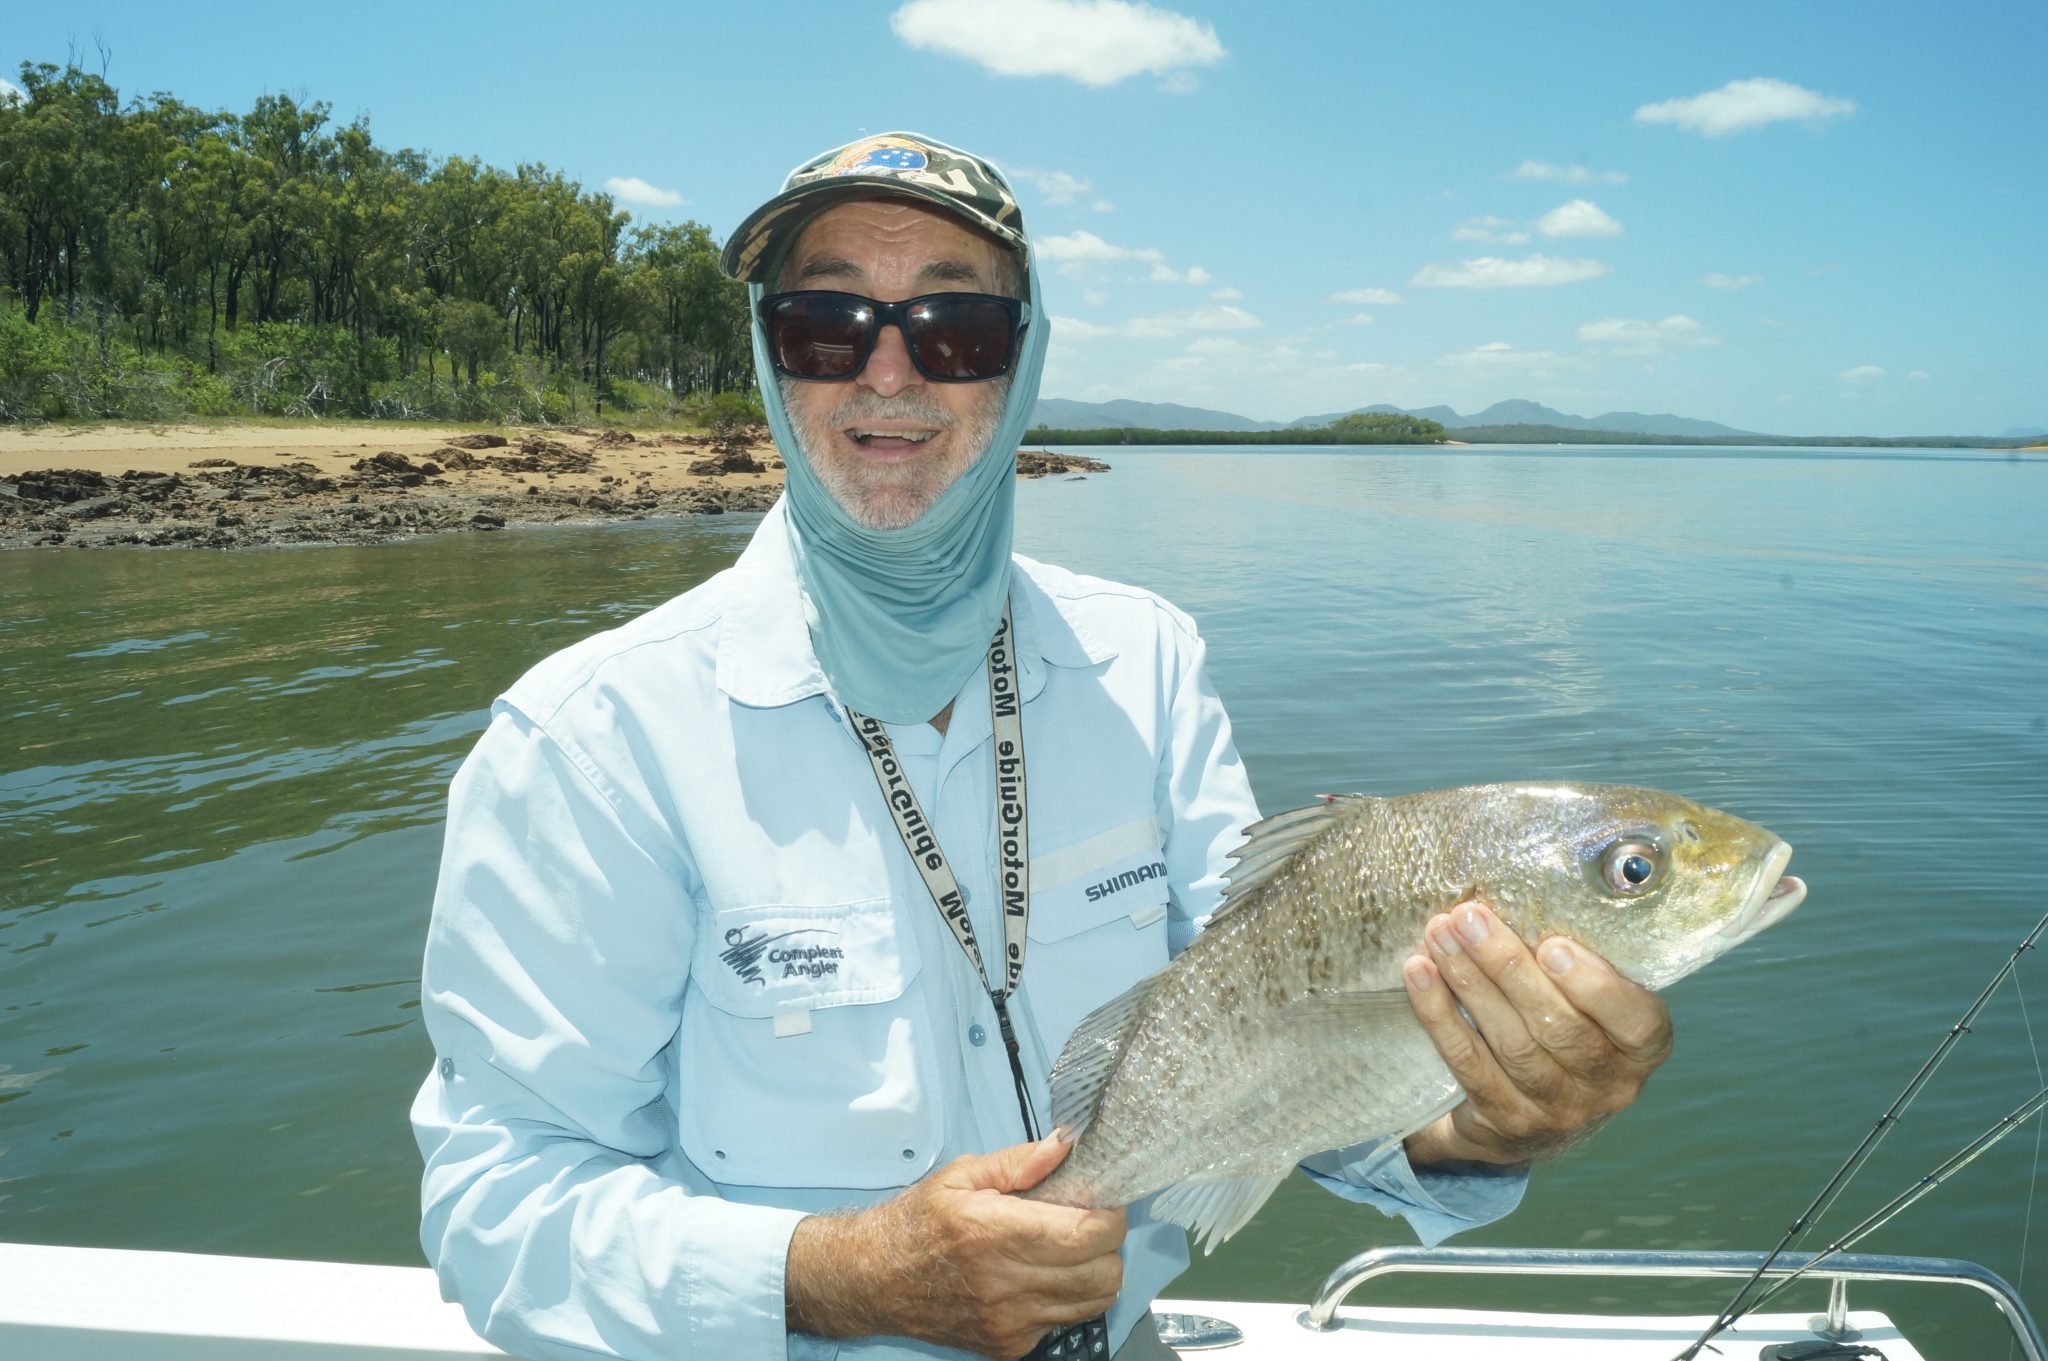 Hunting Grunter with Hard-bodies - By Dave Magner - Fish & Boat